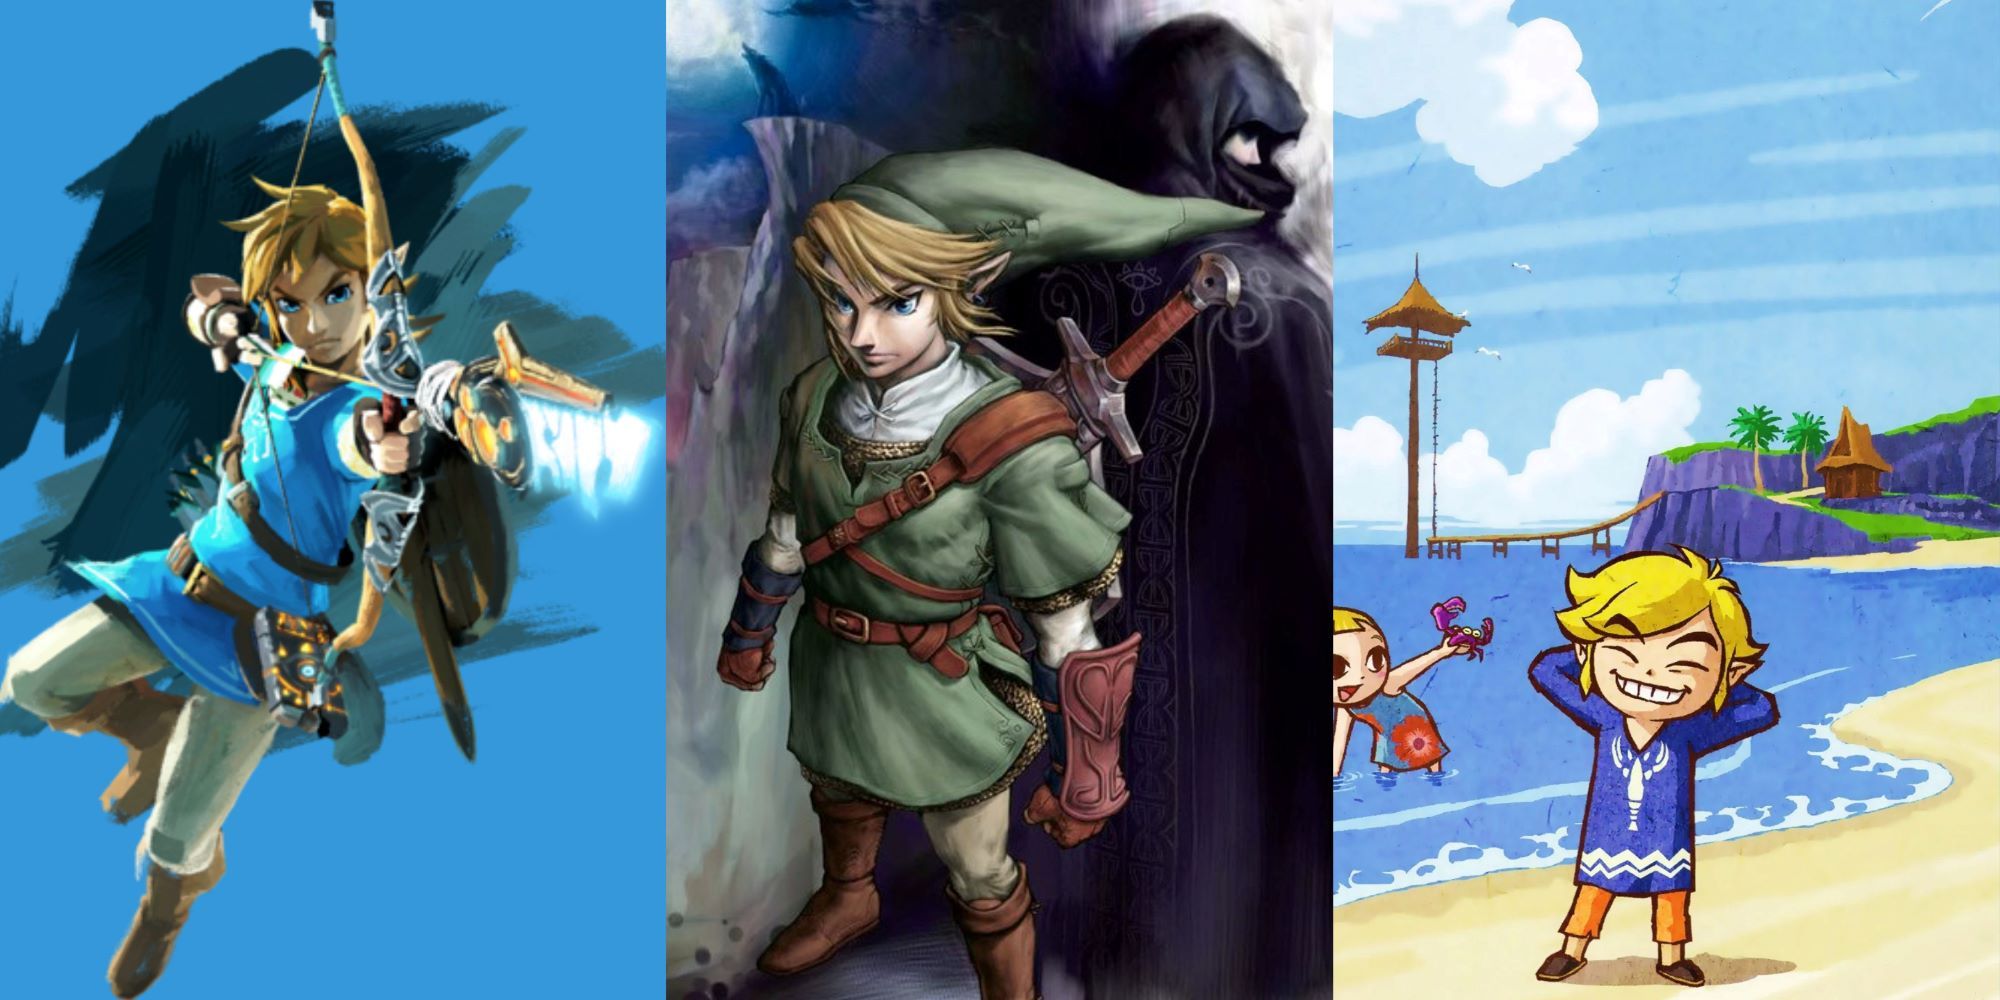 Left - Link from Breath of the Wild, Center - Link from twilight Princess, Right - Link from Wind Waker